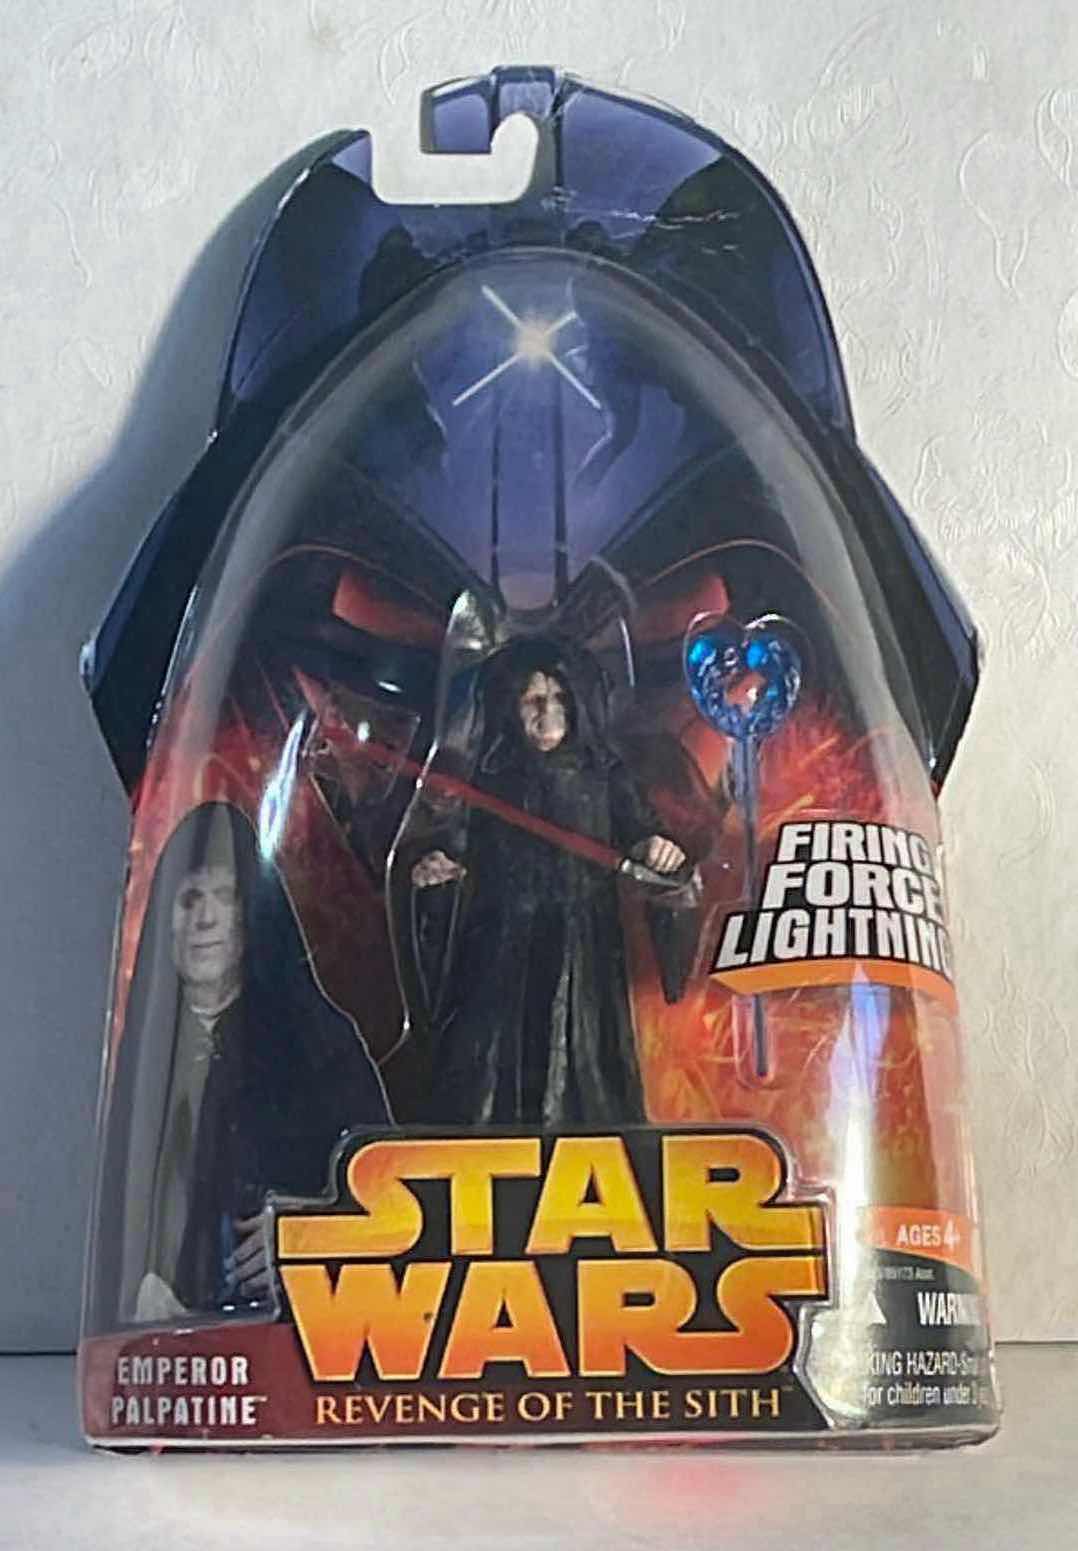 Photo 1 of NIB STAR WARS REVENGE OF THE SITH “EMPEROR PALPATINE” ACTION FIGURE - RETAIL PRICE $16.00